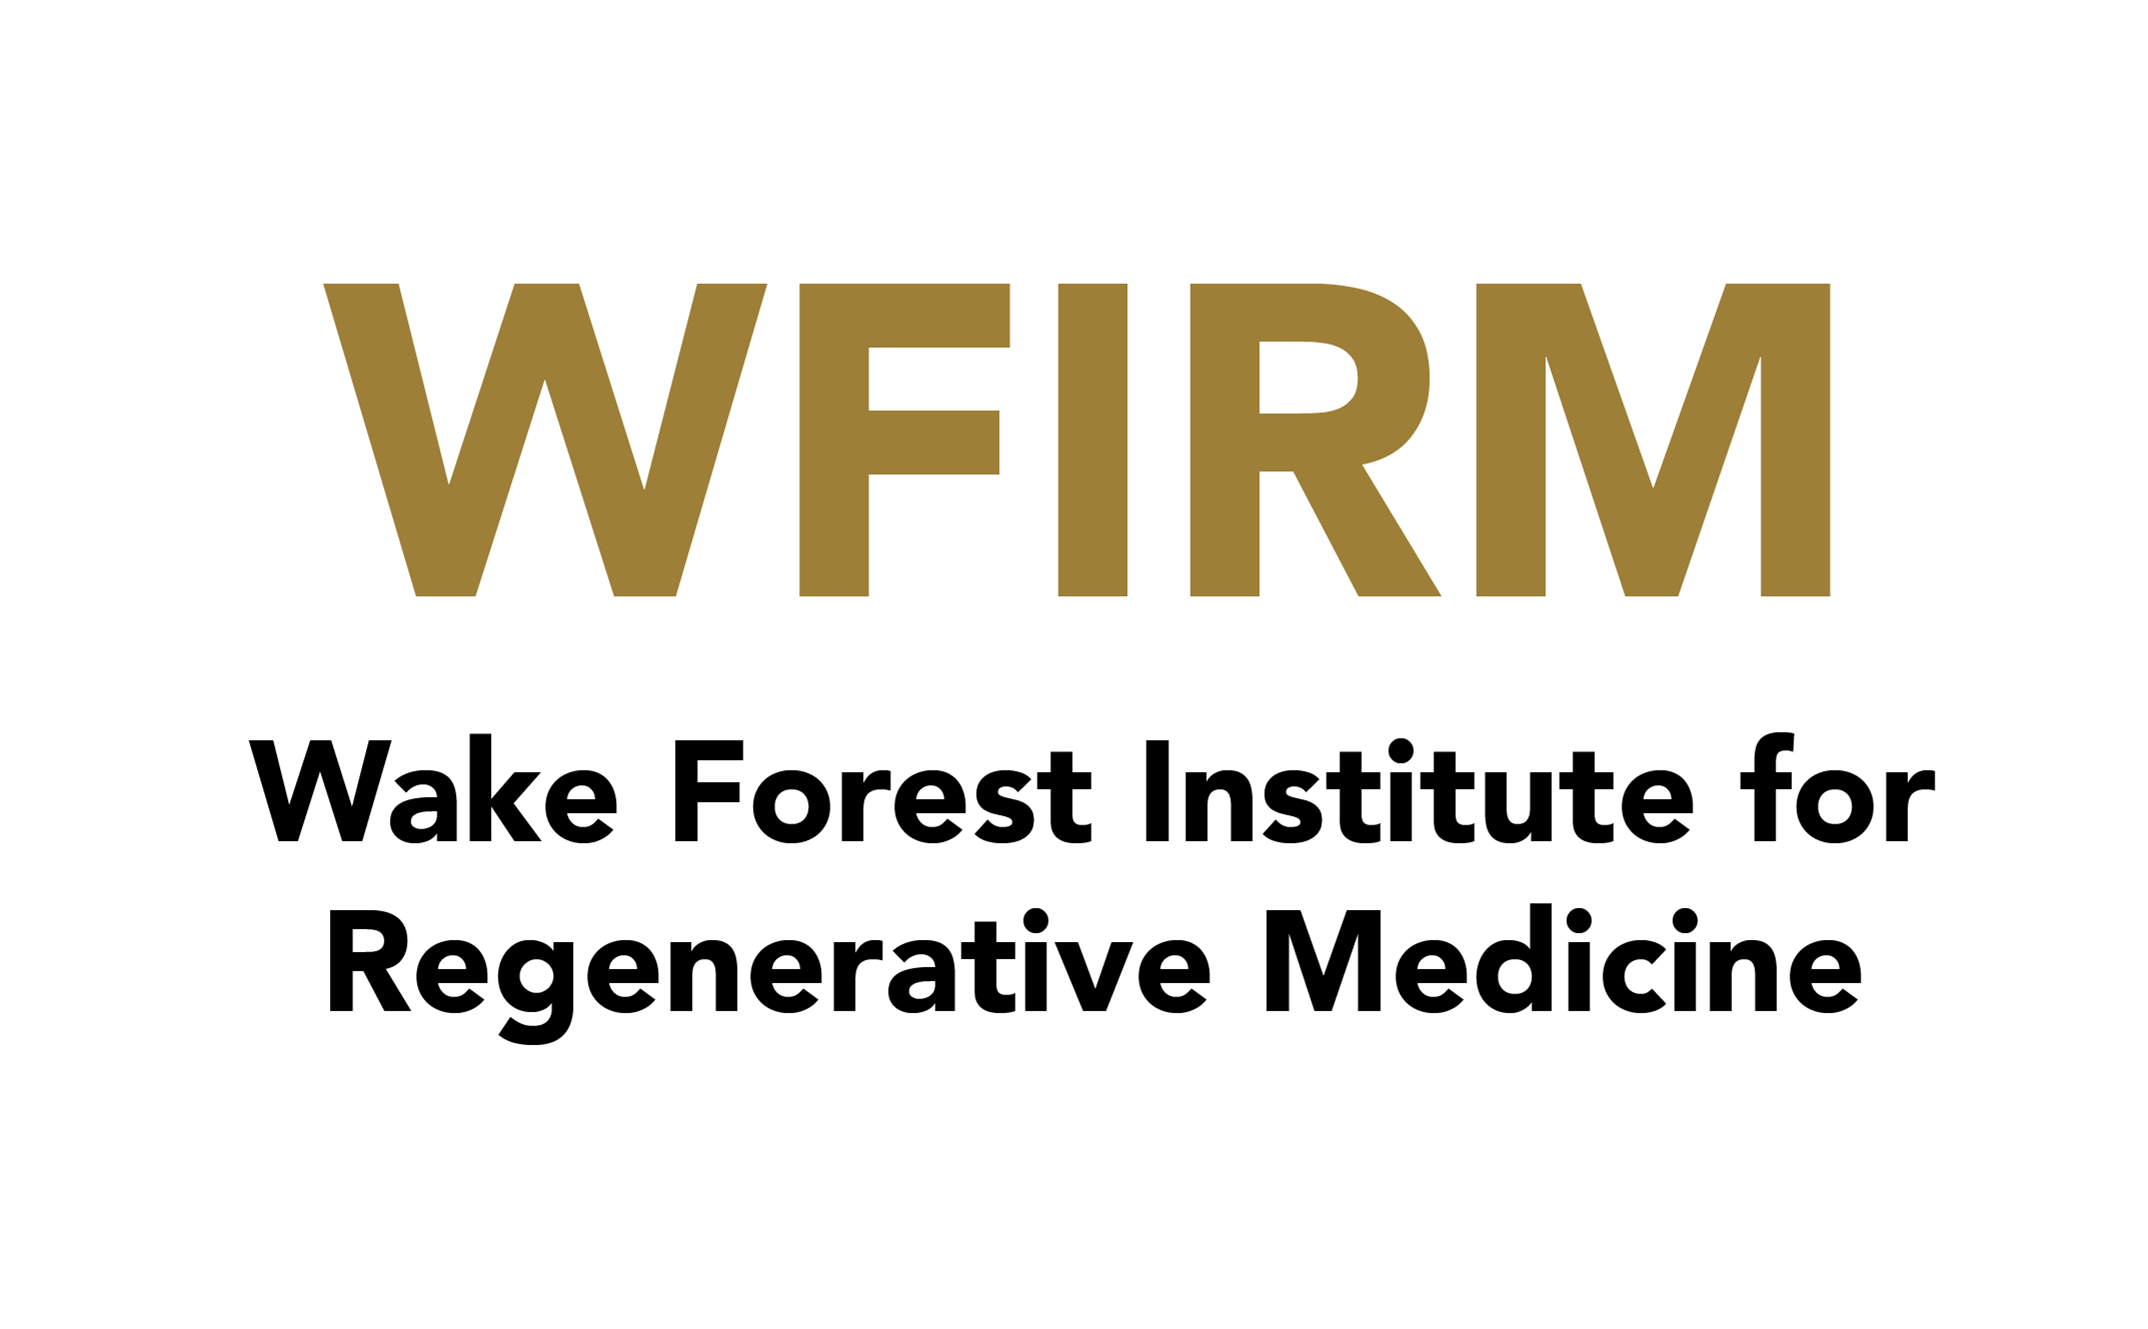 wfirm-logo-2022-02.png